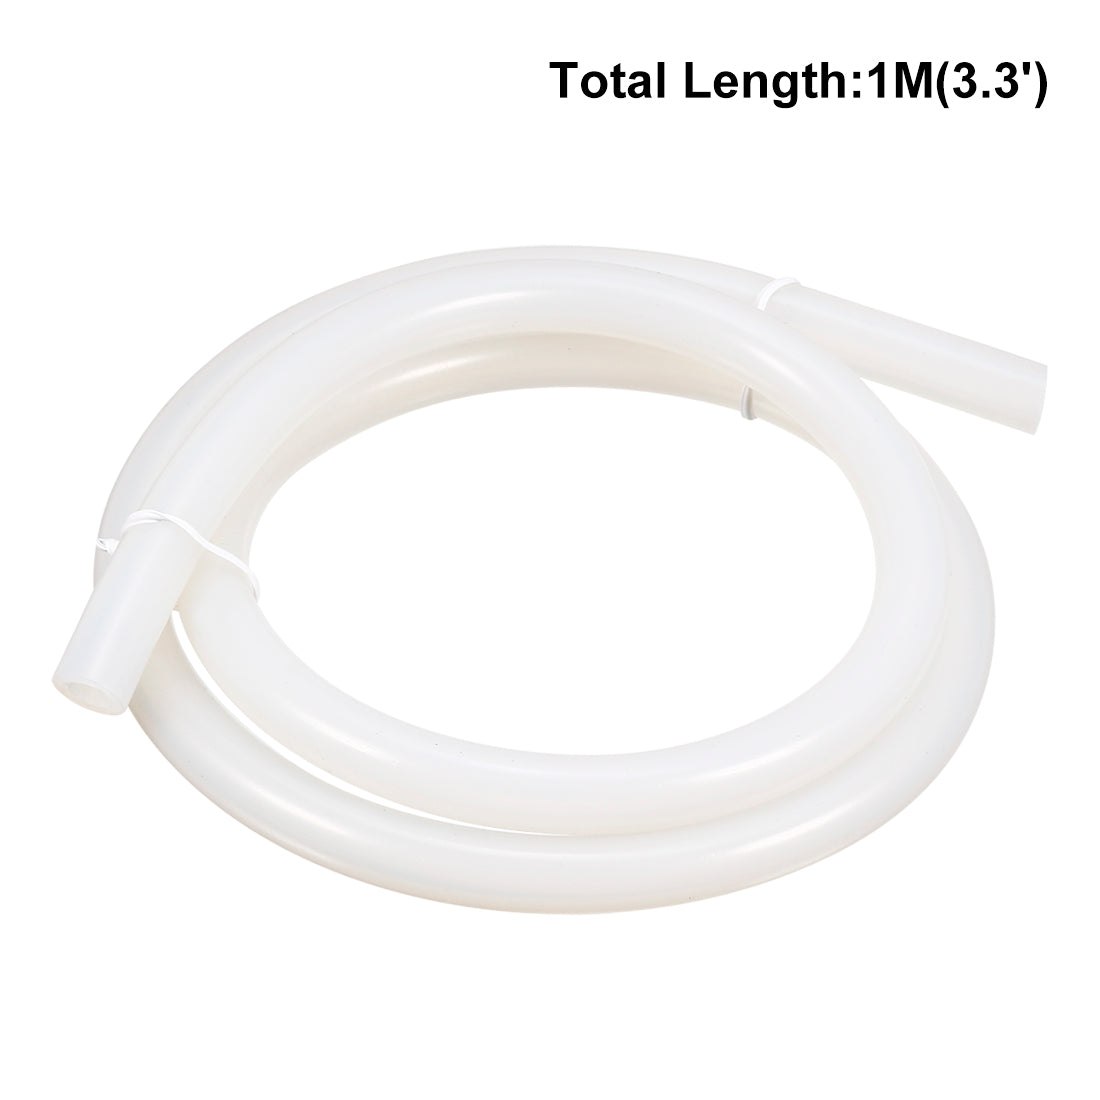 uxcell Uxcell Silicone Tube mm ID X mm OD 1 Meter Flexible Silicone Rubber Tubing Water Air Hose Pipe for Pump Transfer